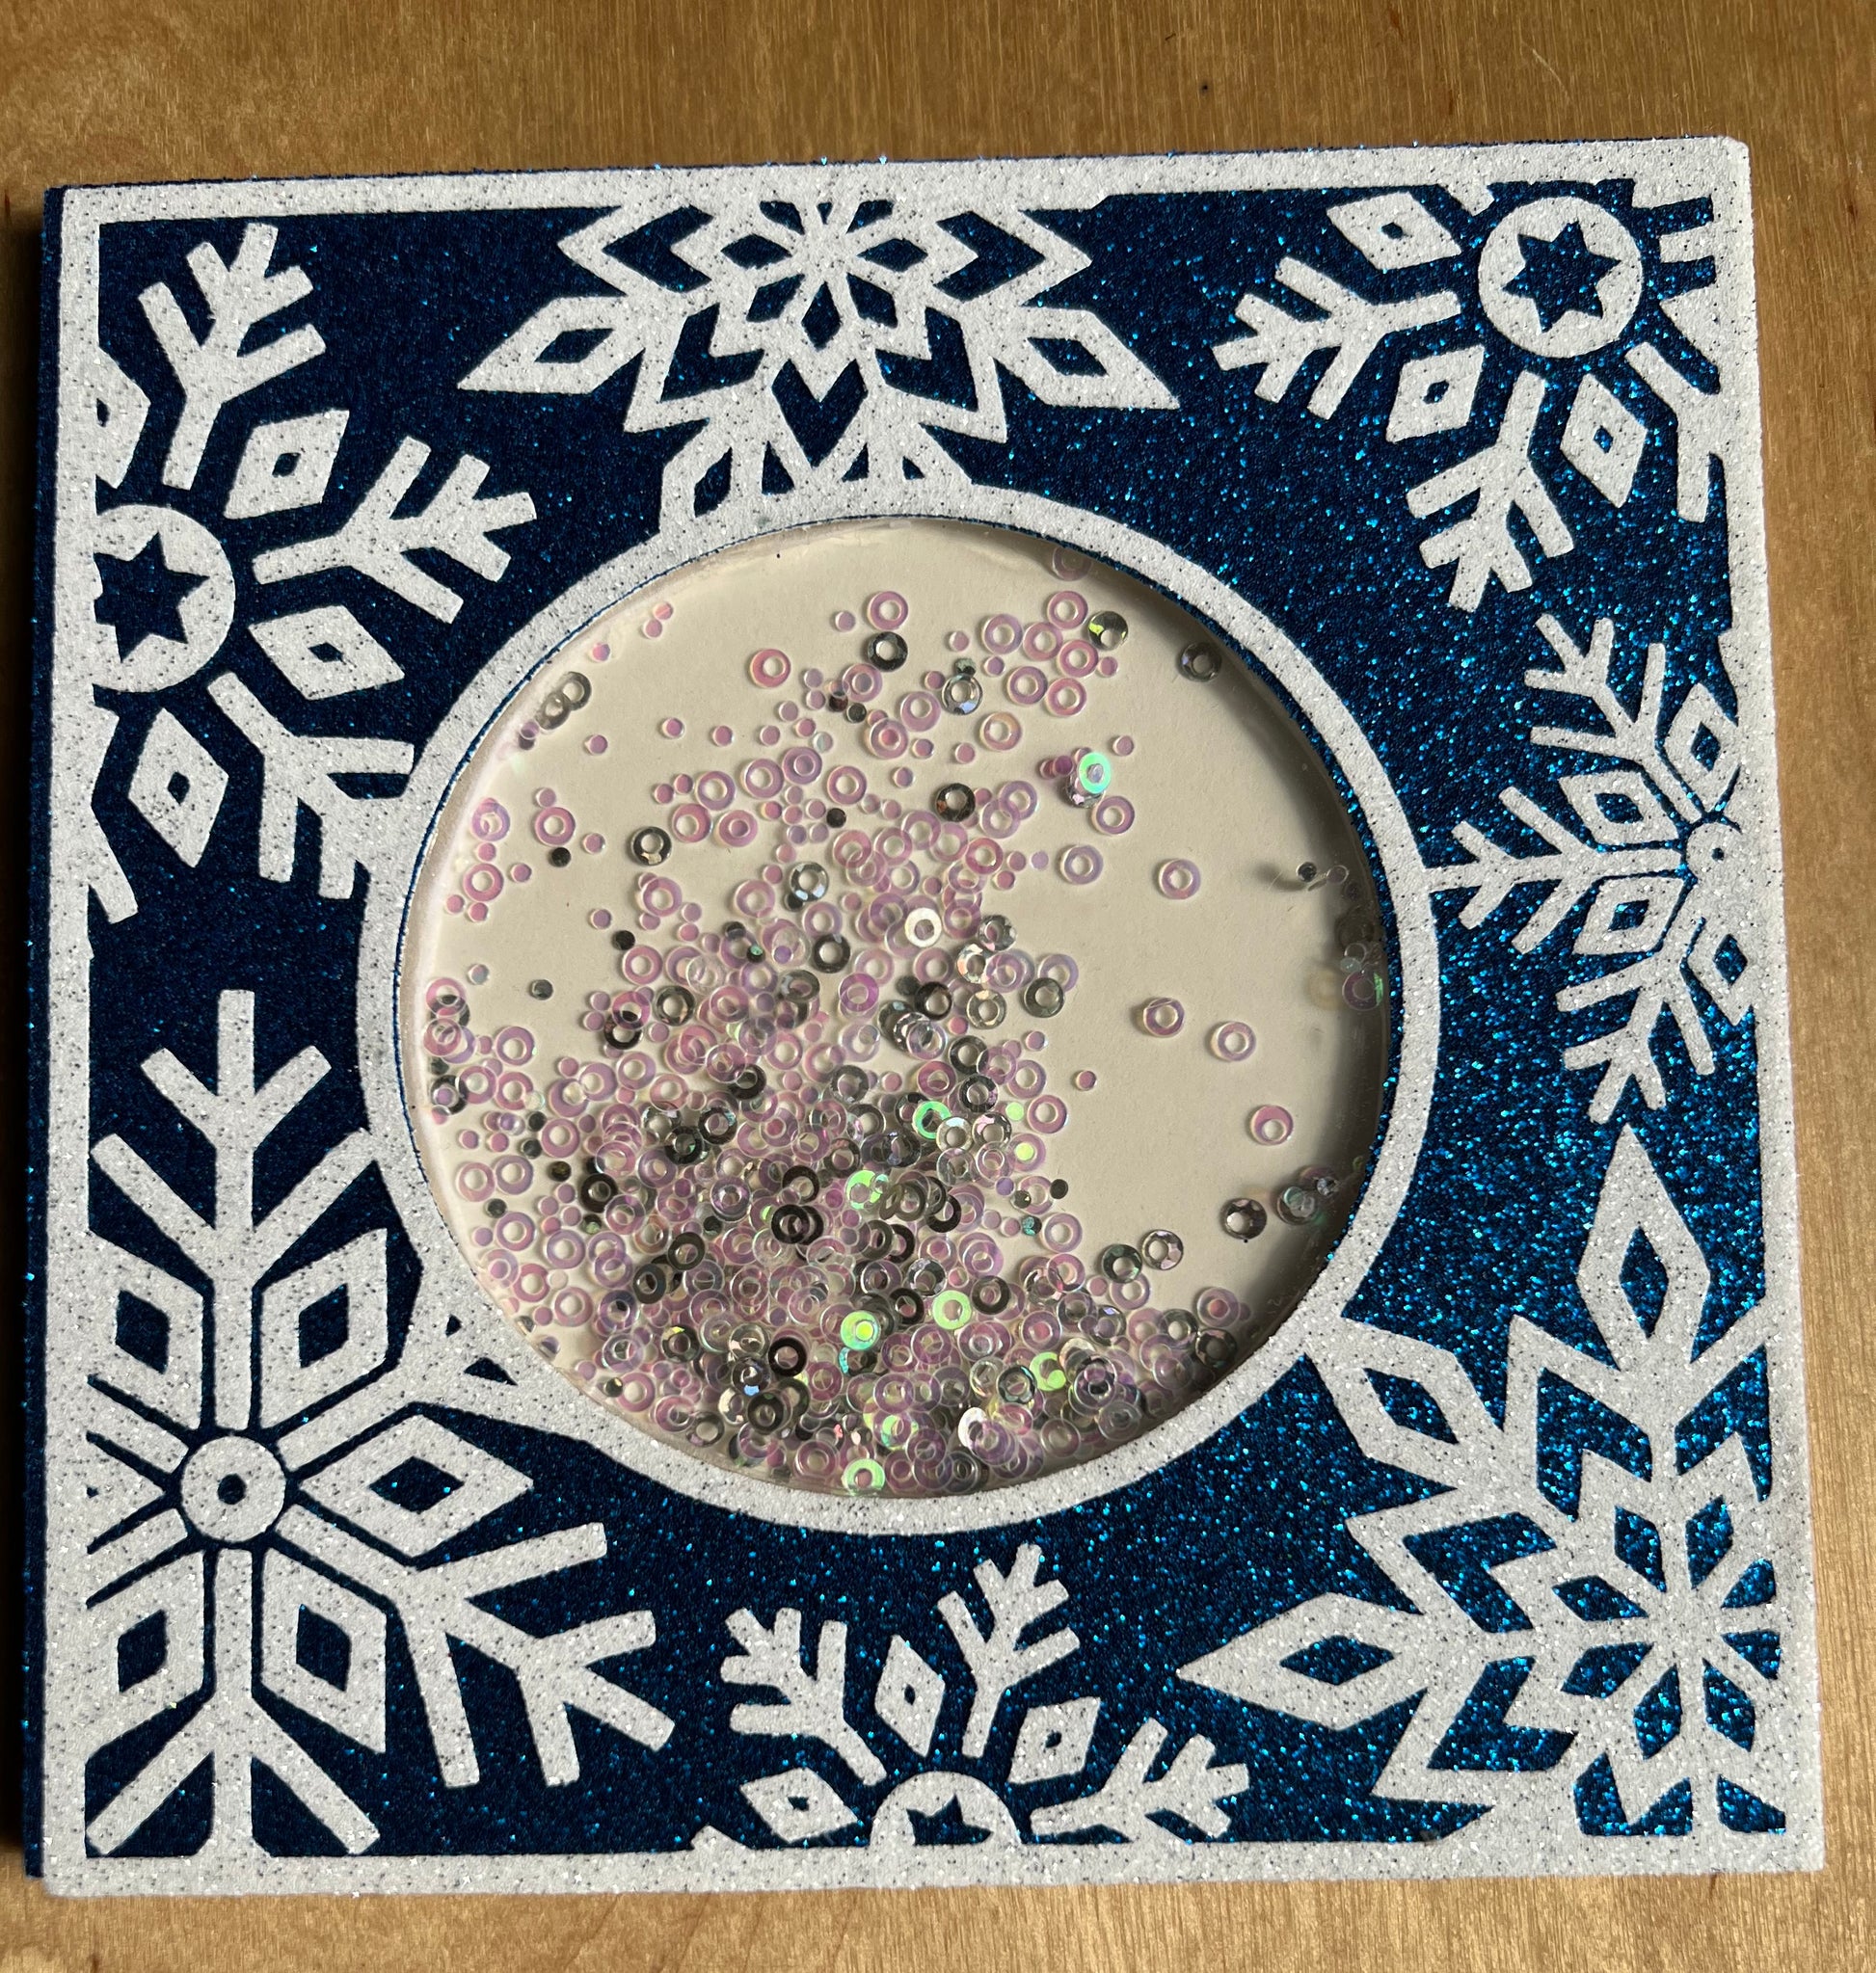 Two Anointed Hands - Snowflake Shaker Card